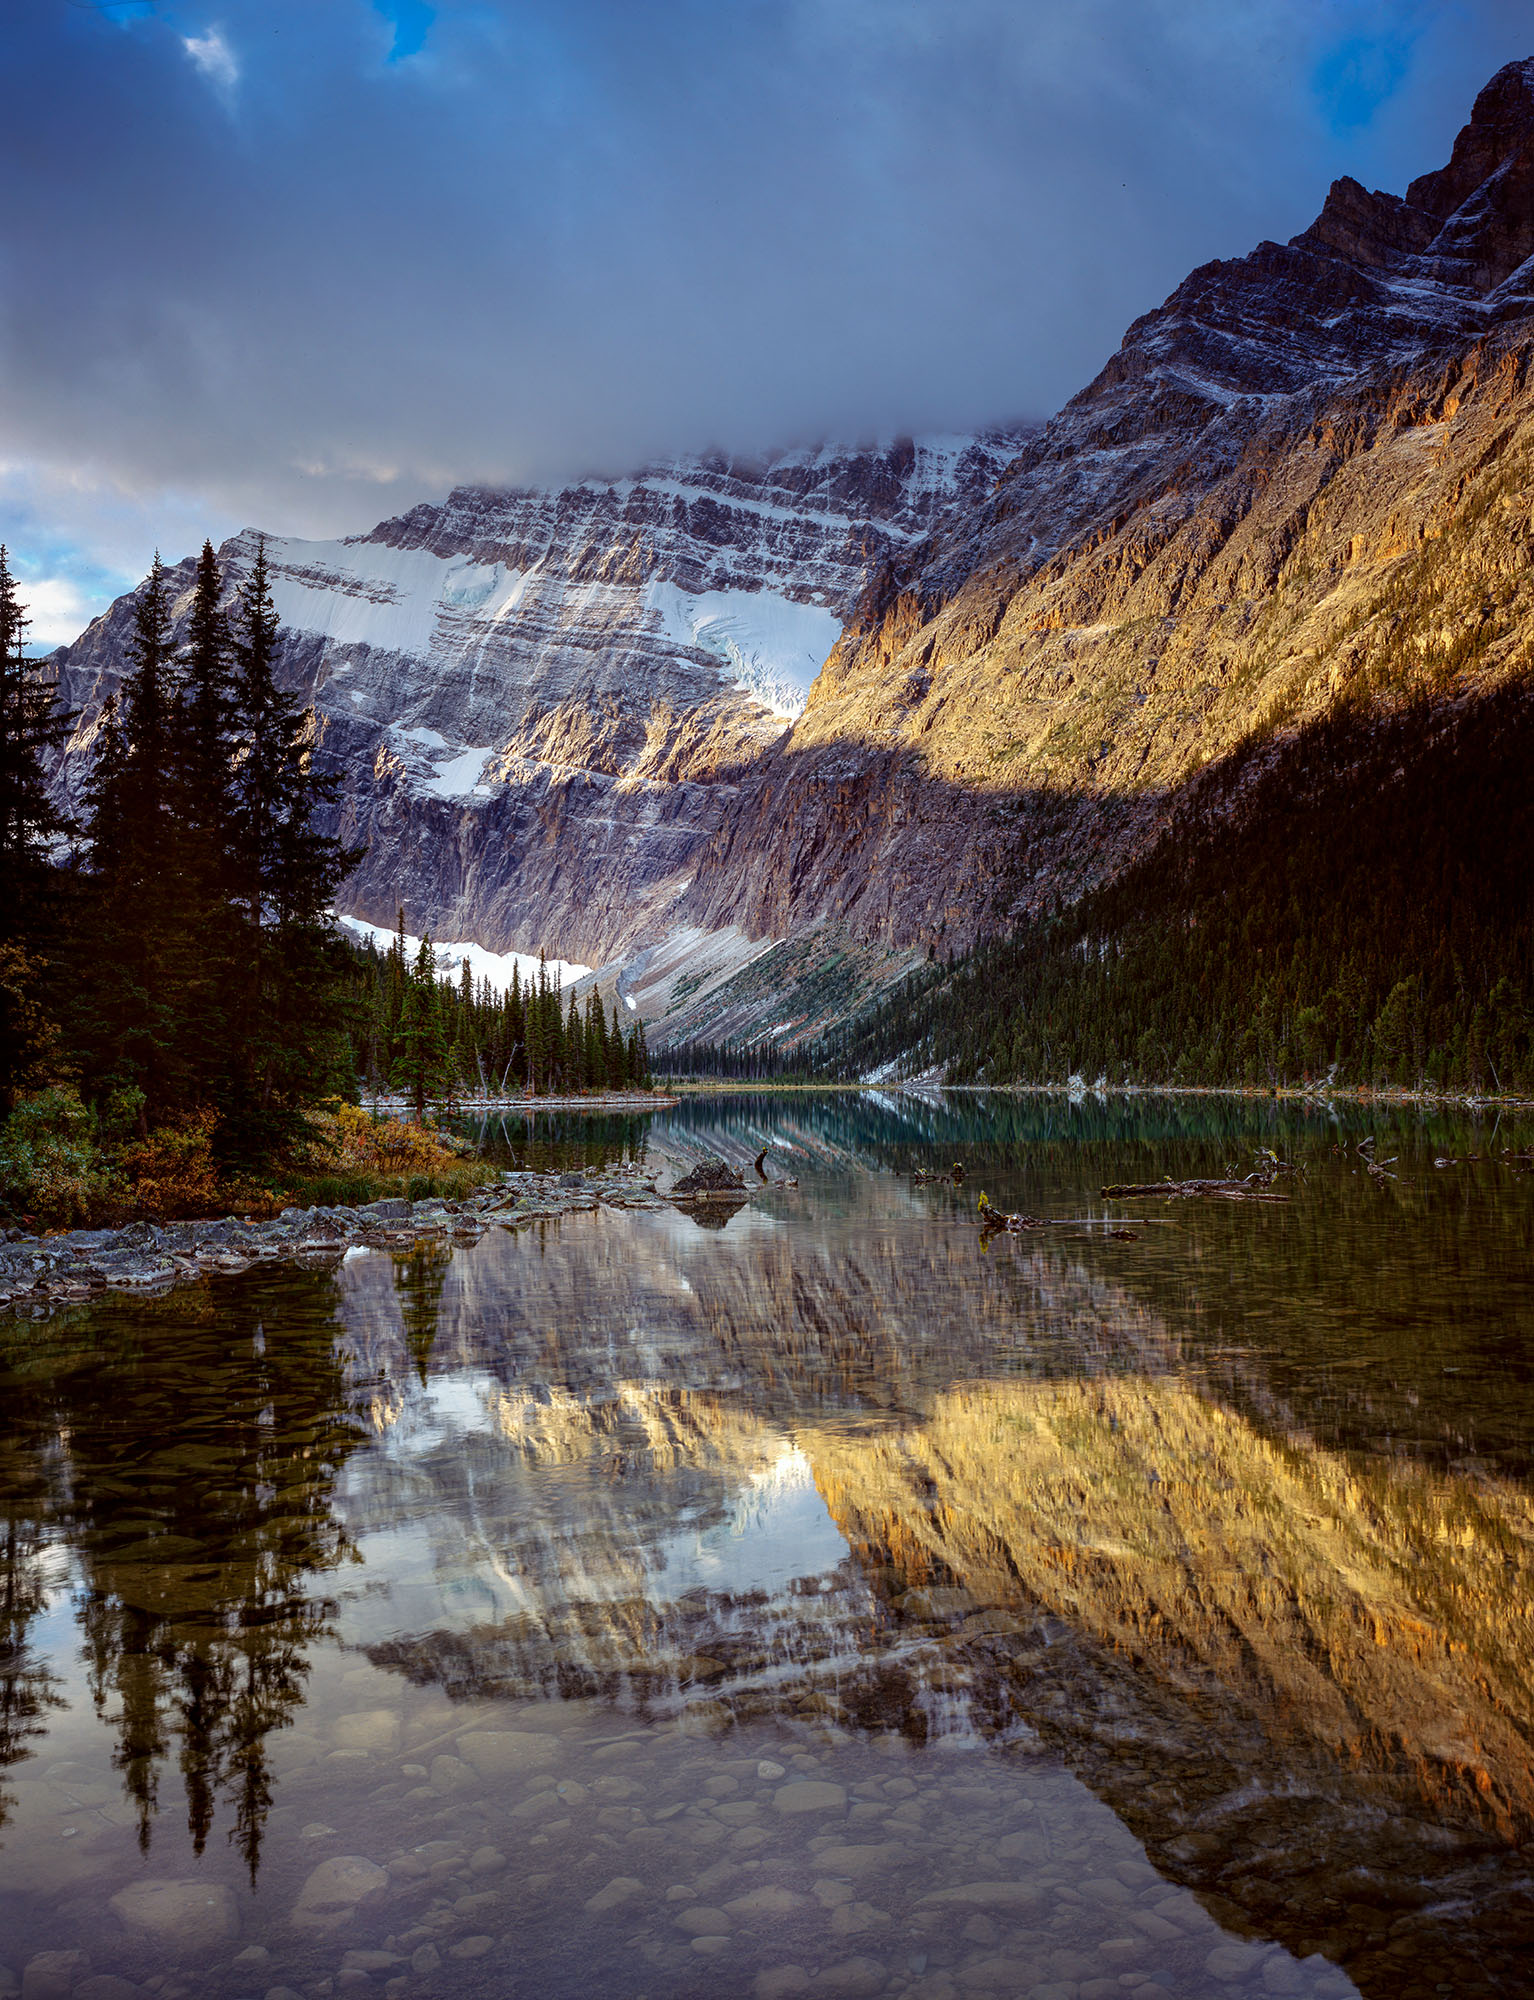 With my Ebony SV45Te Camera and Schneider 110mm XL lens, I set out on an early morning adventure to Jasper National Park's iconic...